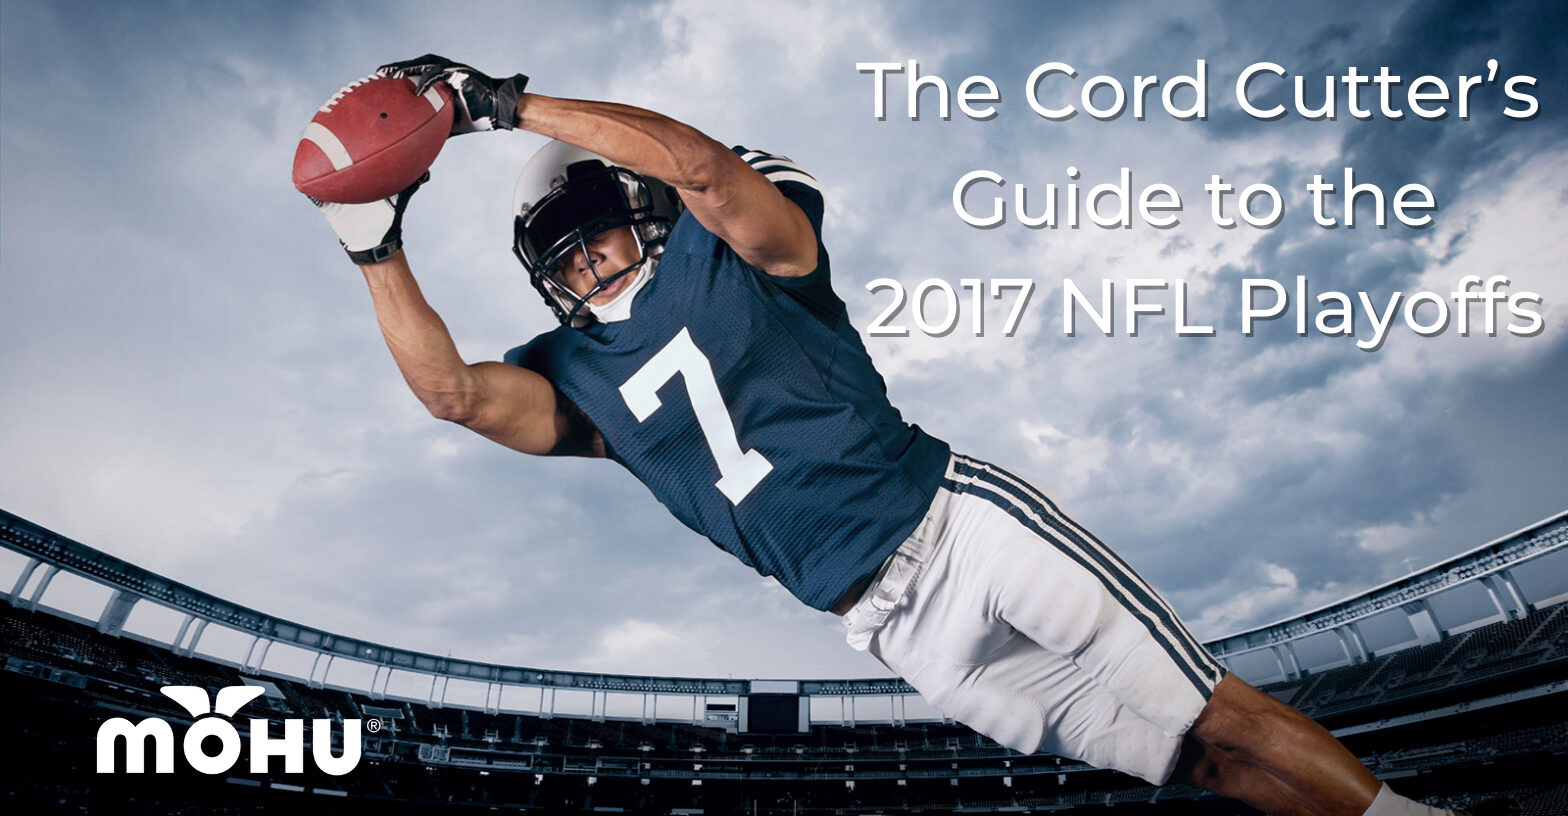 Football player jumping to catch the ball with the copy "The Cord Cutter’s Guide to the 2017 NFL Playoffs" and Mohu logo